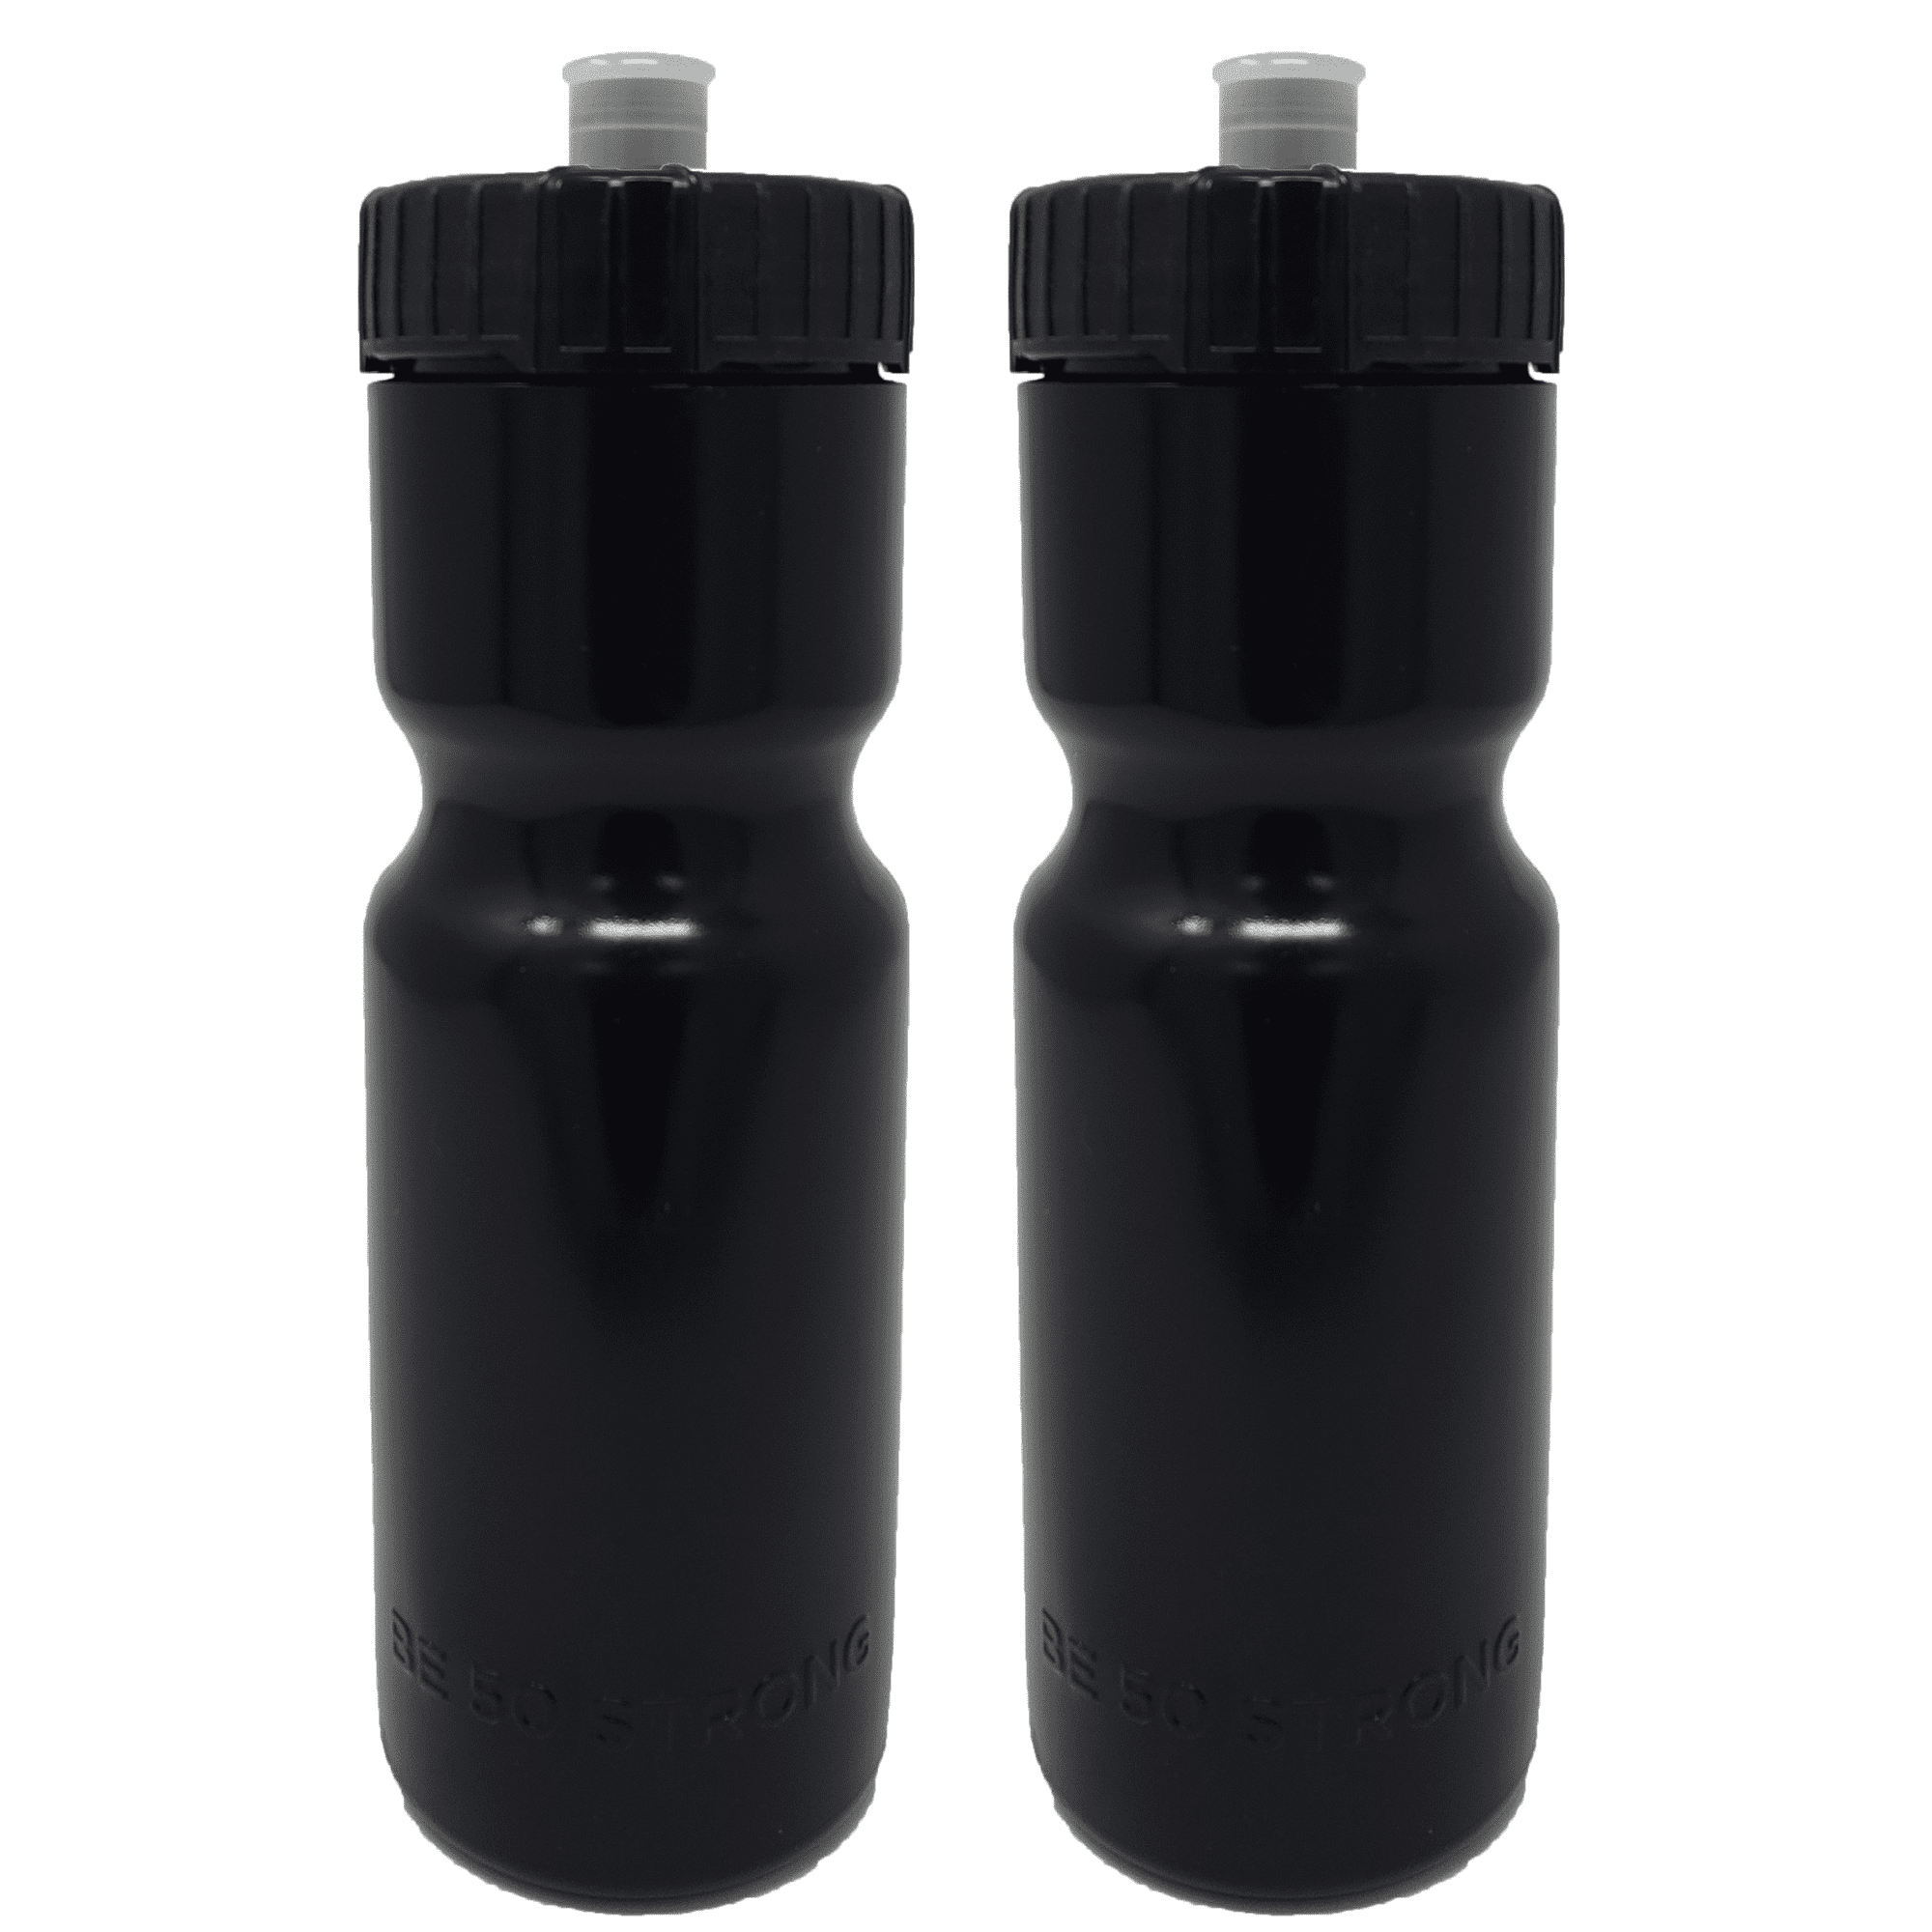 50 Strong Sports Squeeze Water Bottle Two Pack - 22 oz. Bottles 